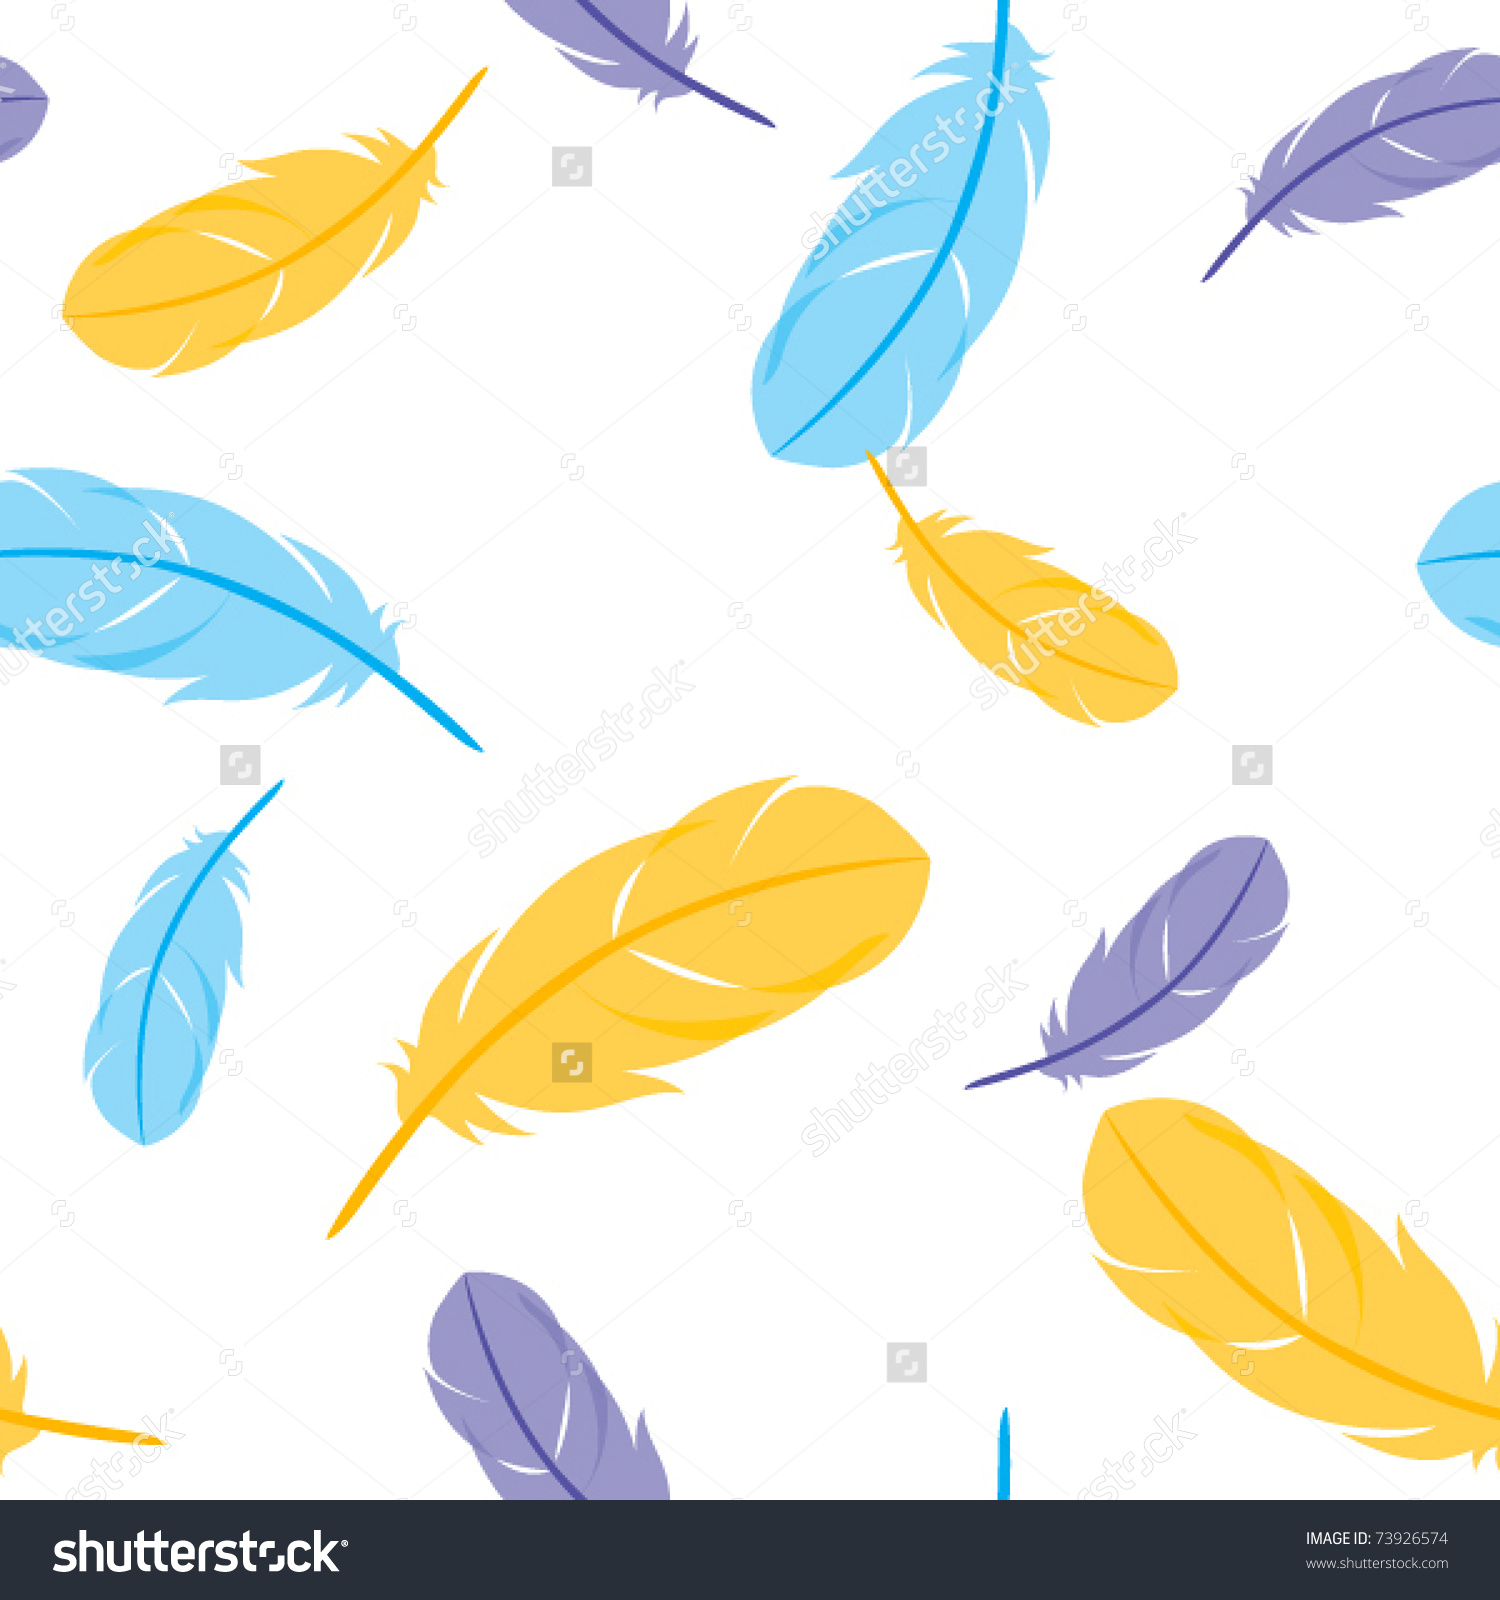 Feathers Falling Clip Art.